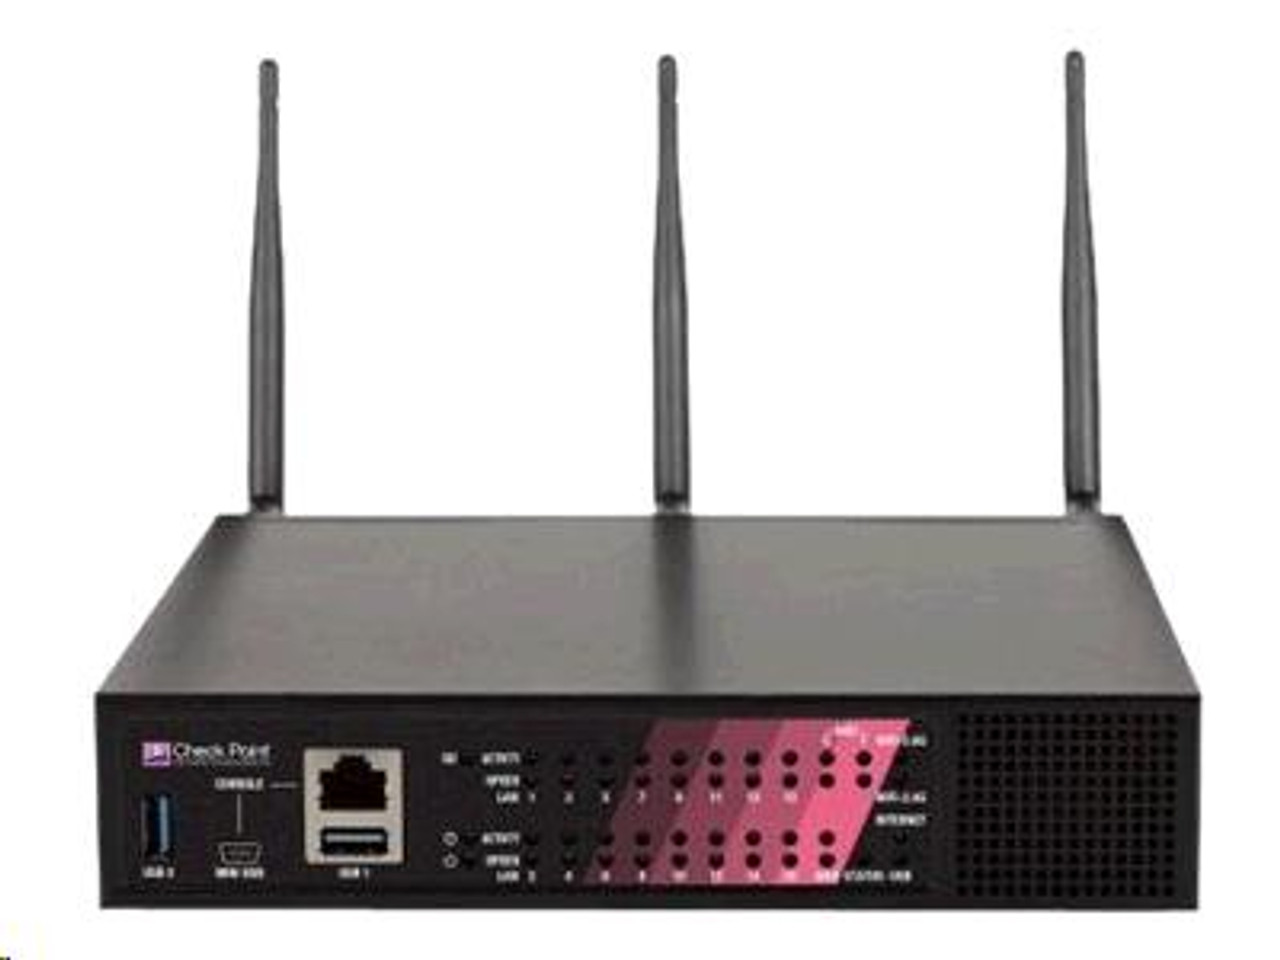 1490 Security Appliance with Threat Prevention Security suite for 80211ac WiFi (Latin America, Singapore, Hong Kong, Thailand, Sri-Lanka)